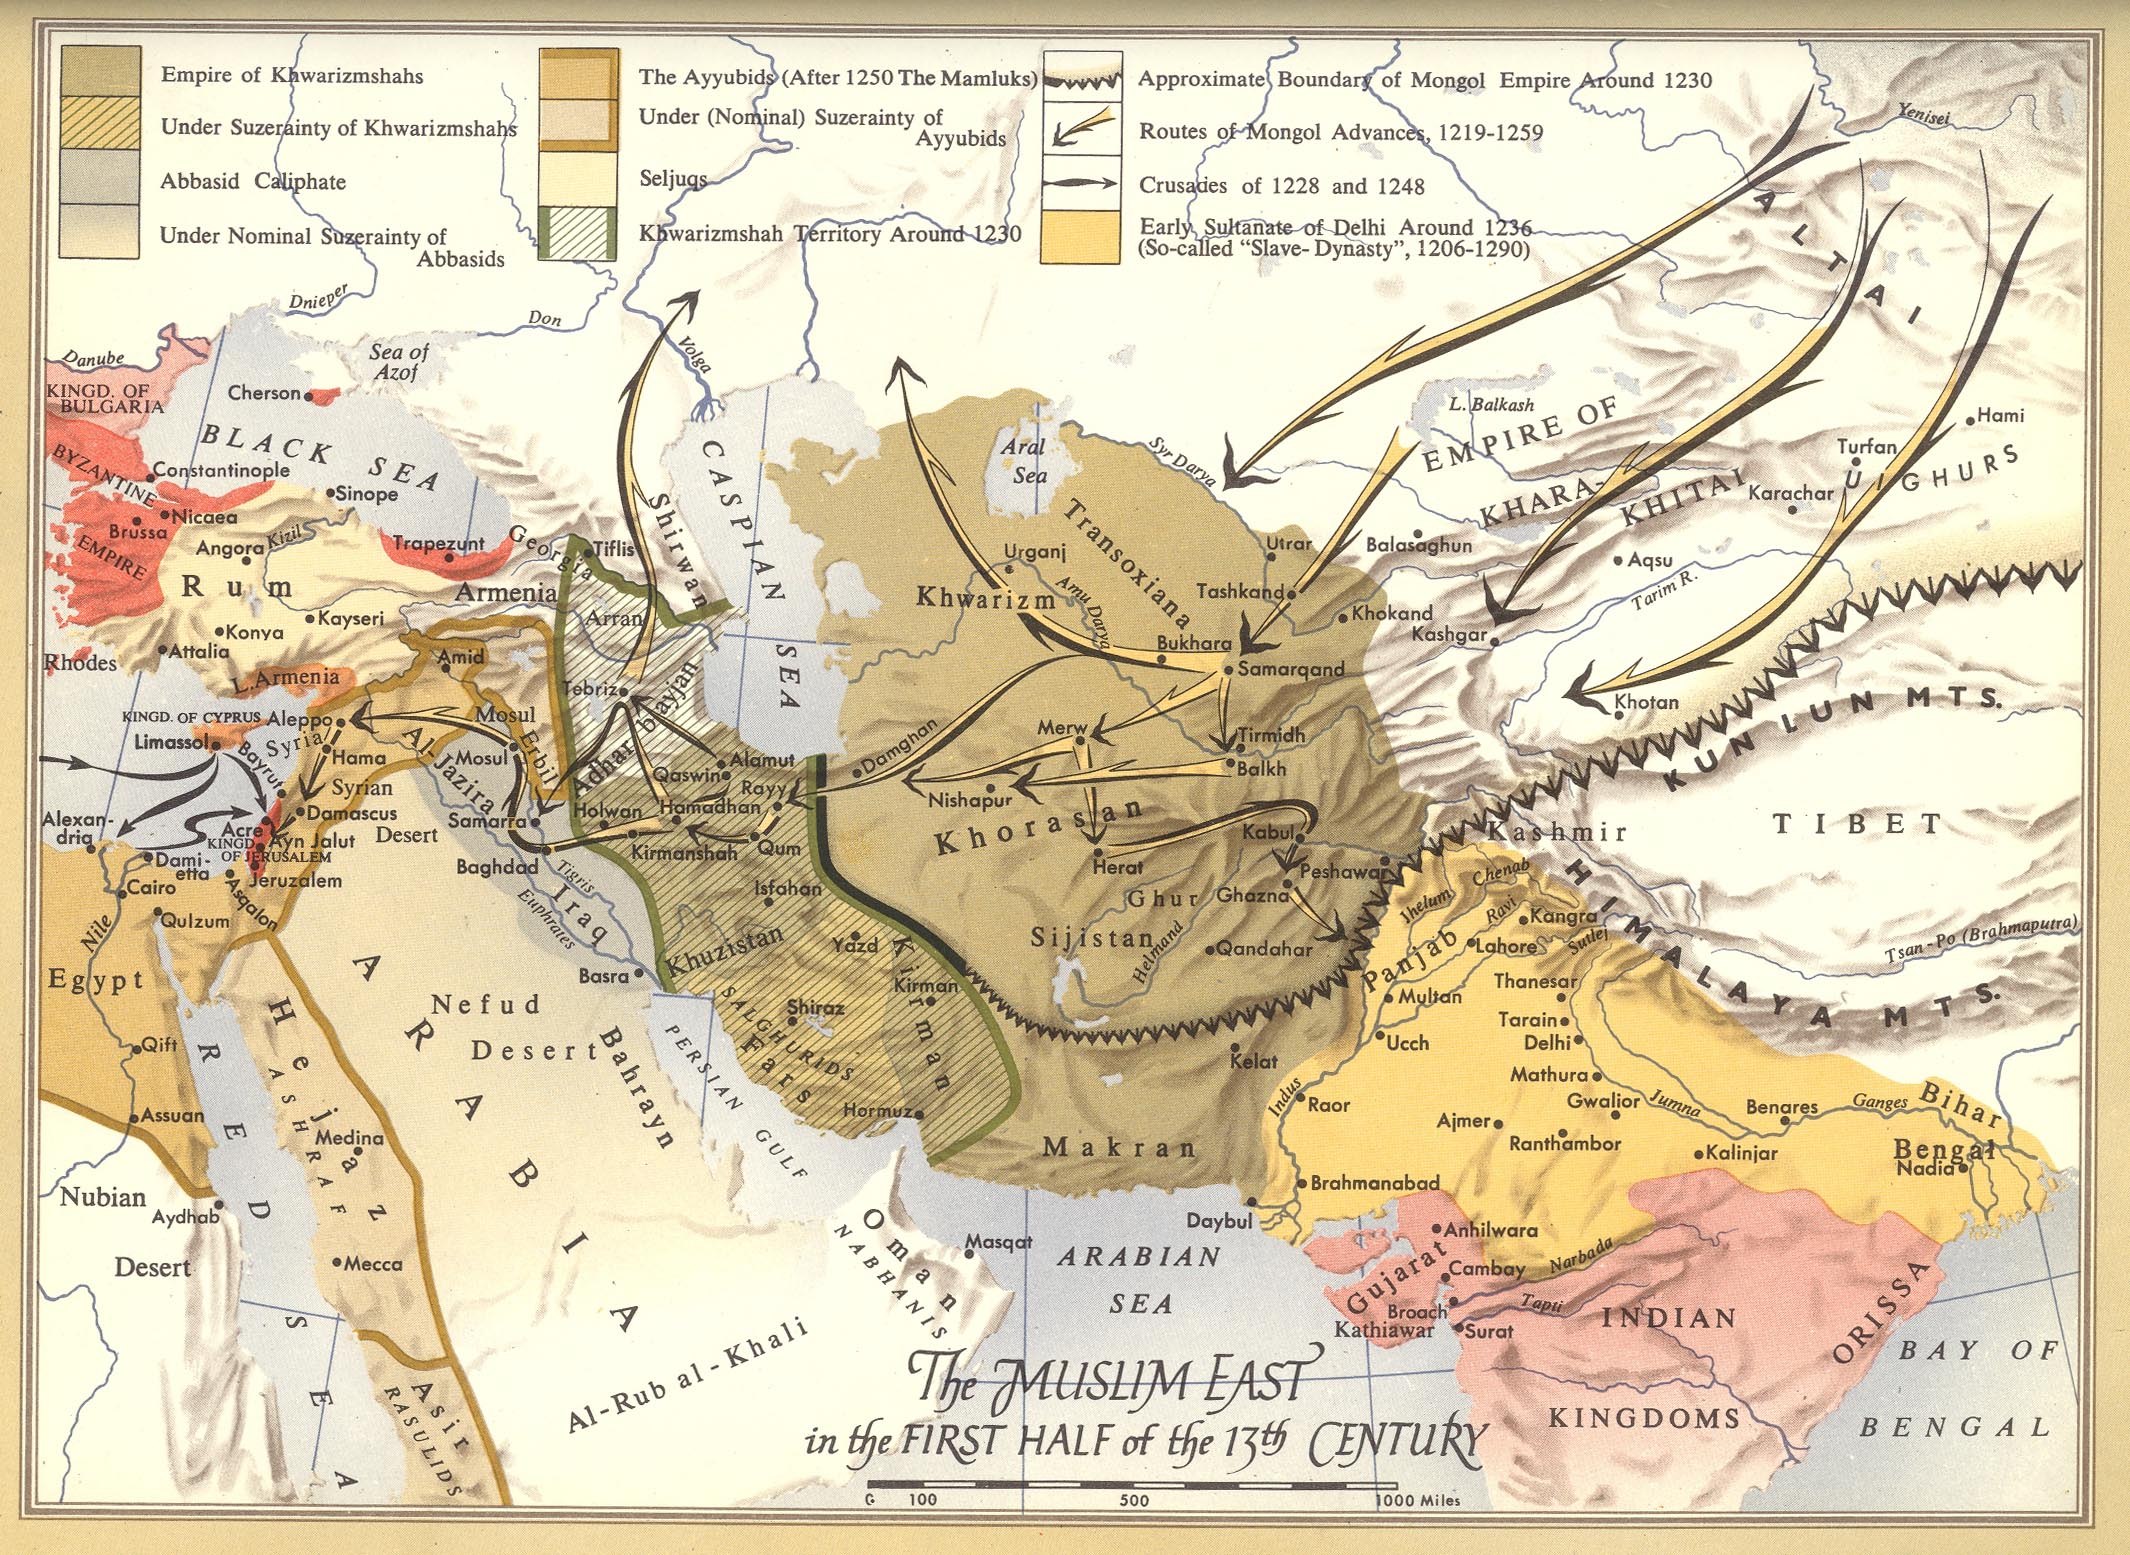 Muslim East in first half of the 13th century